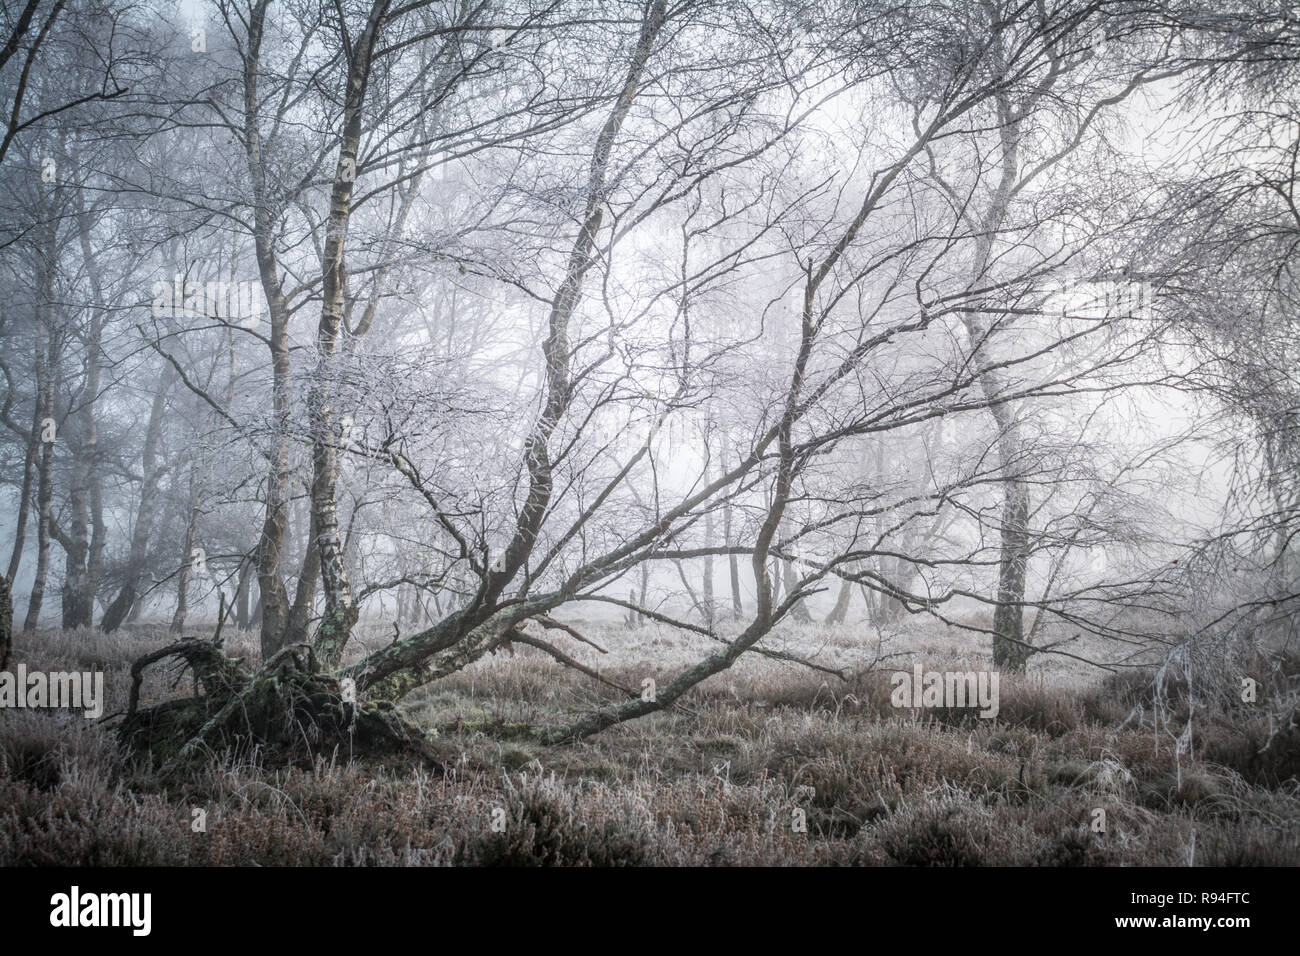 Hoar frost at Frensham Common in Surrey, UK. Heathland landscape scene with frosty trees. Stock Photo